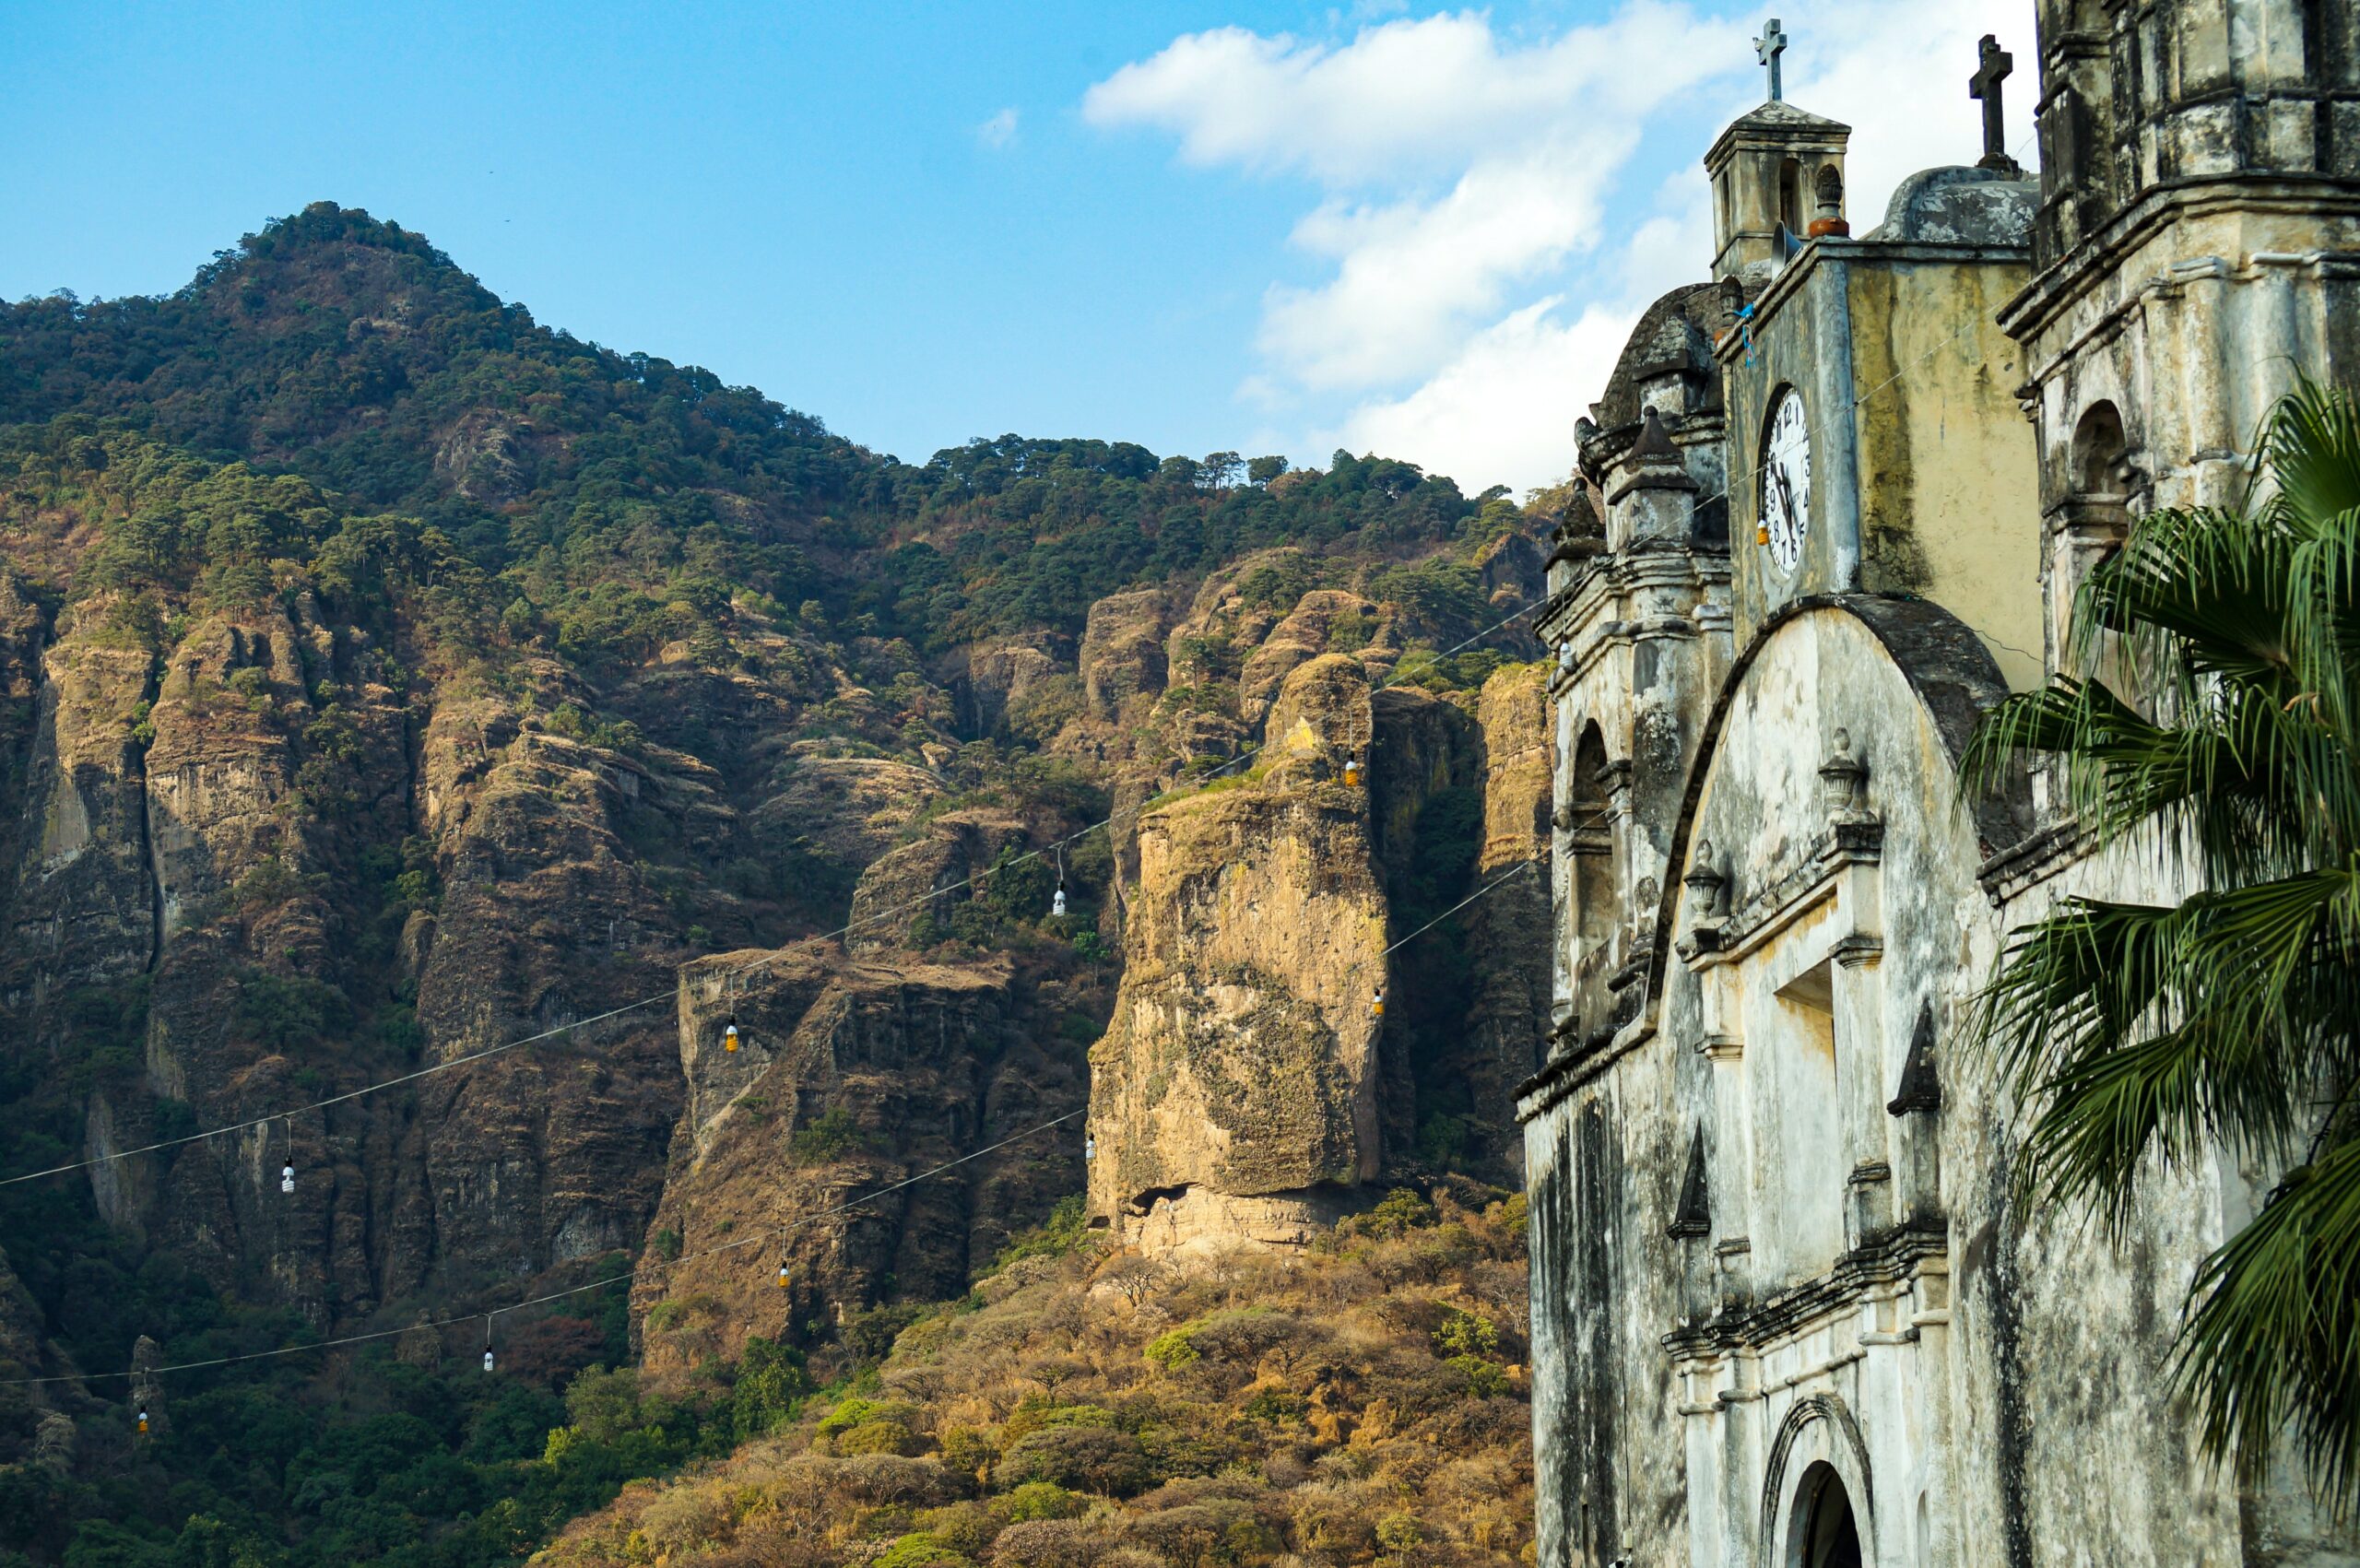 The Tepozteco Pyramid is located in the mountains of Mexico.
pictured: The Morelo Mountains and a aged church in front of the green forest